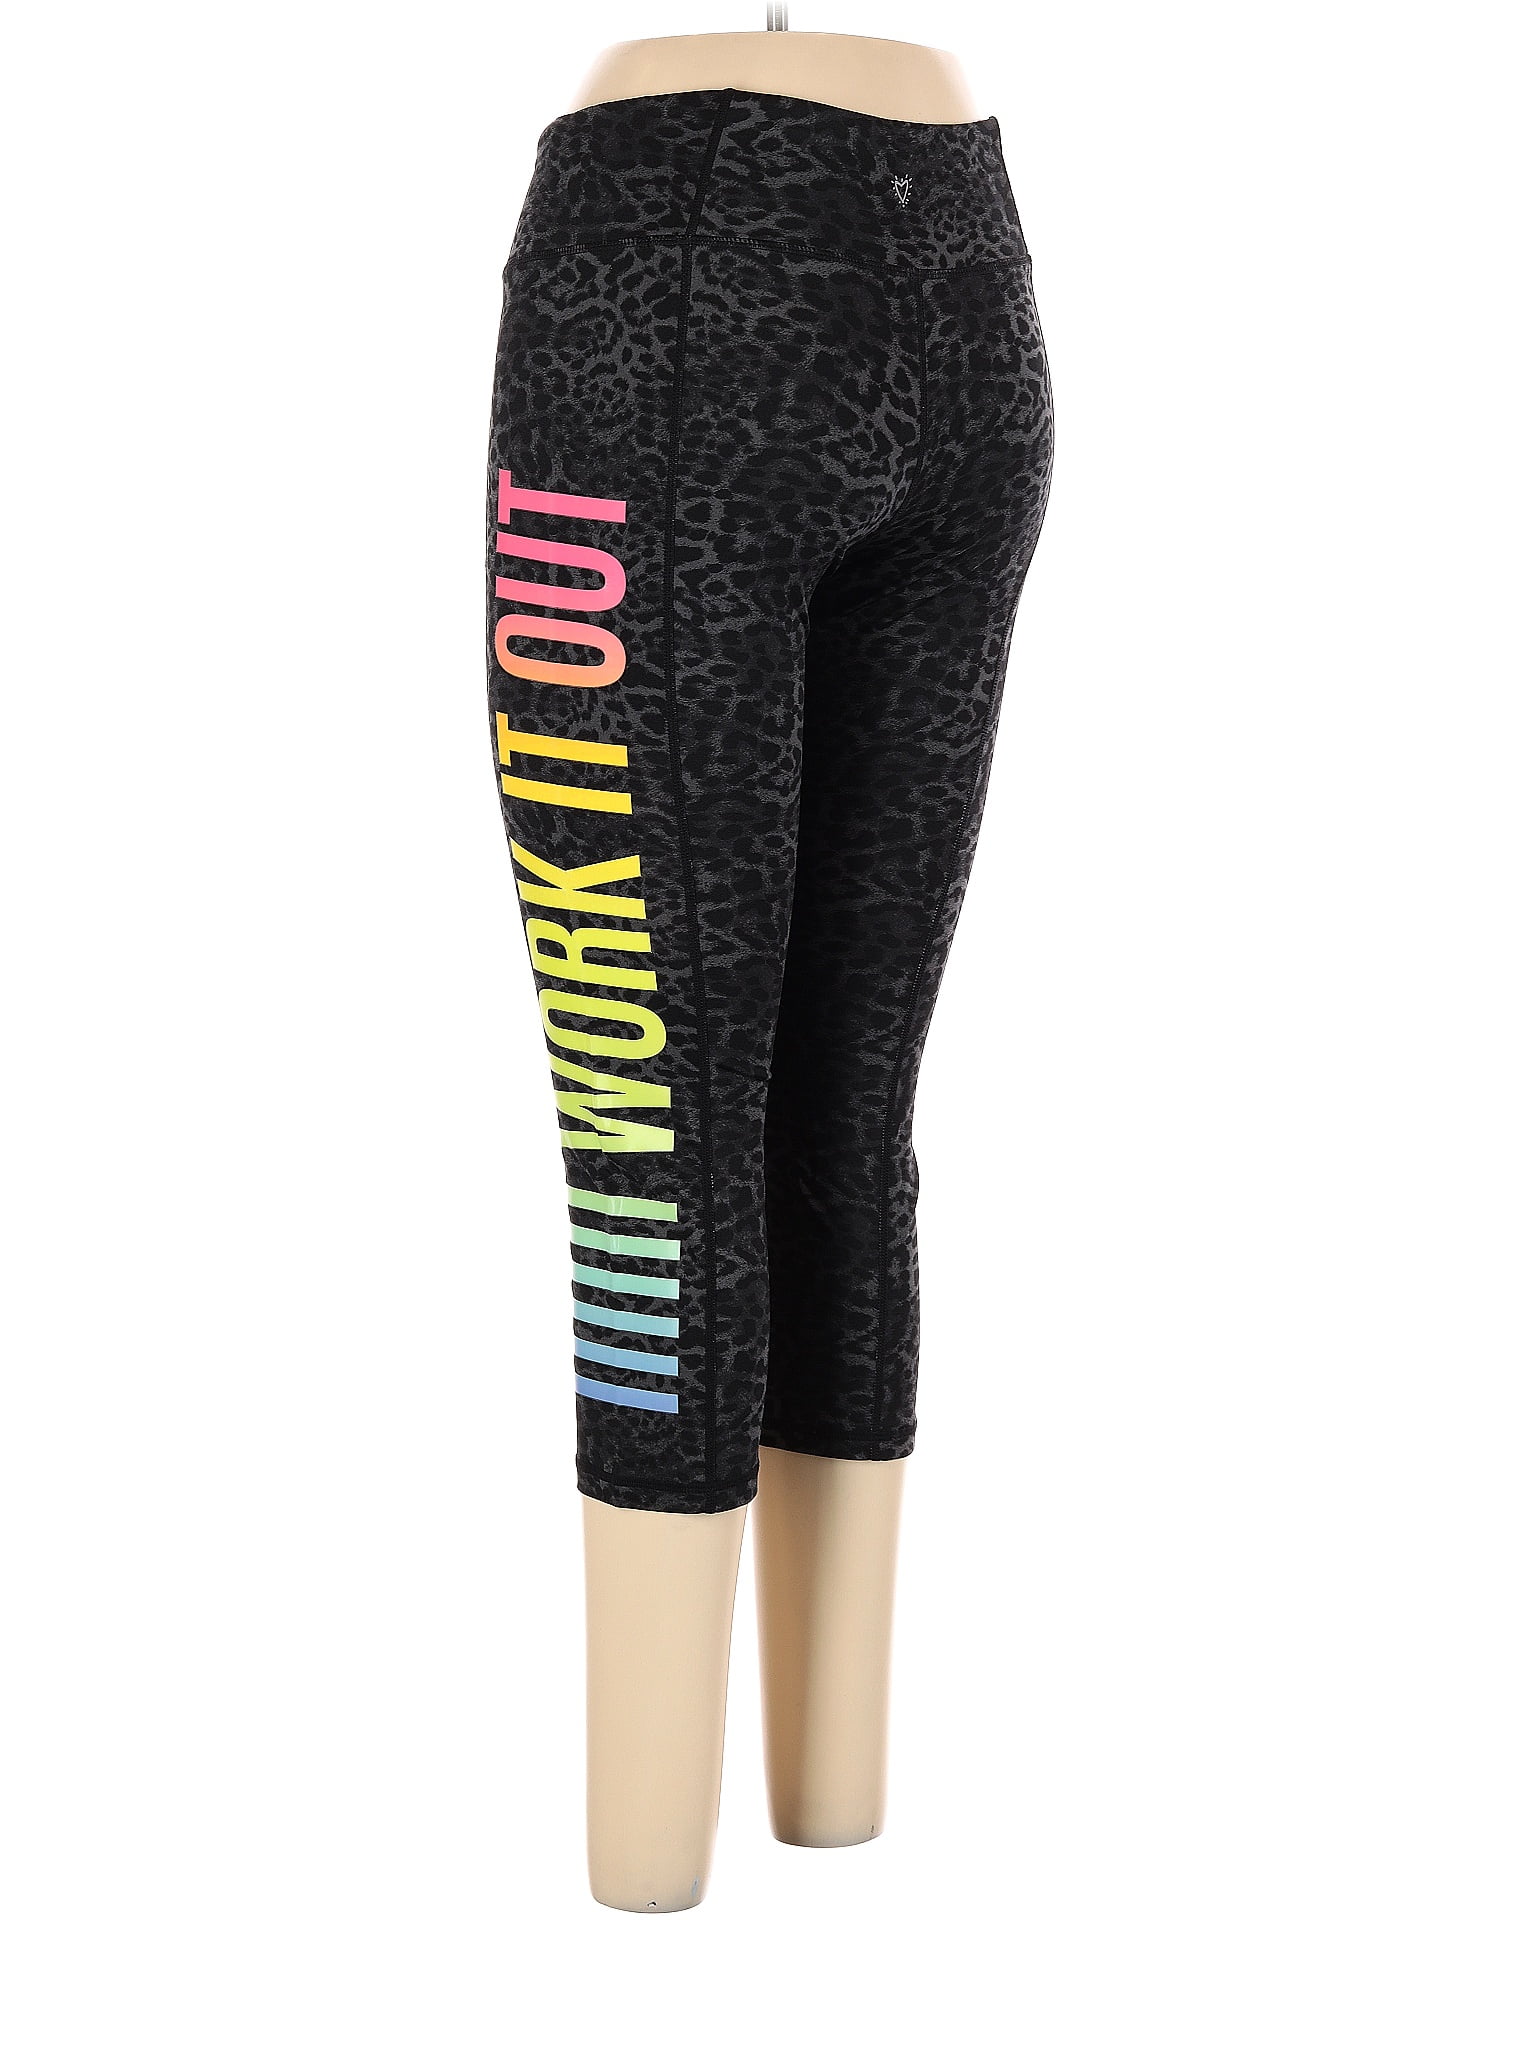 GIVE LOVE GET LOVE By Betsey Johnson Leopard Print Multi Color Black  Leggings Size M - 62% off